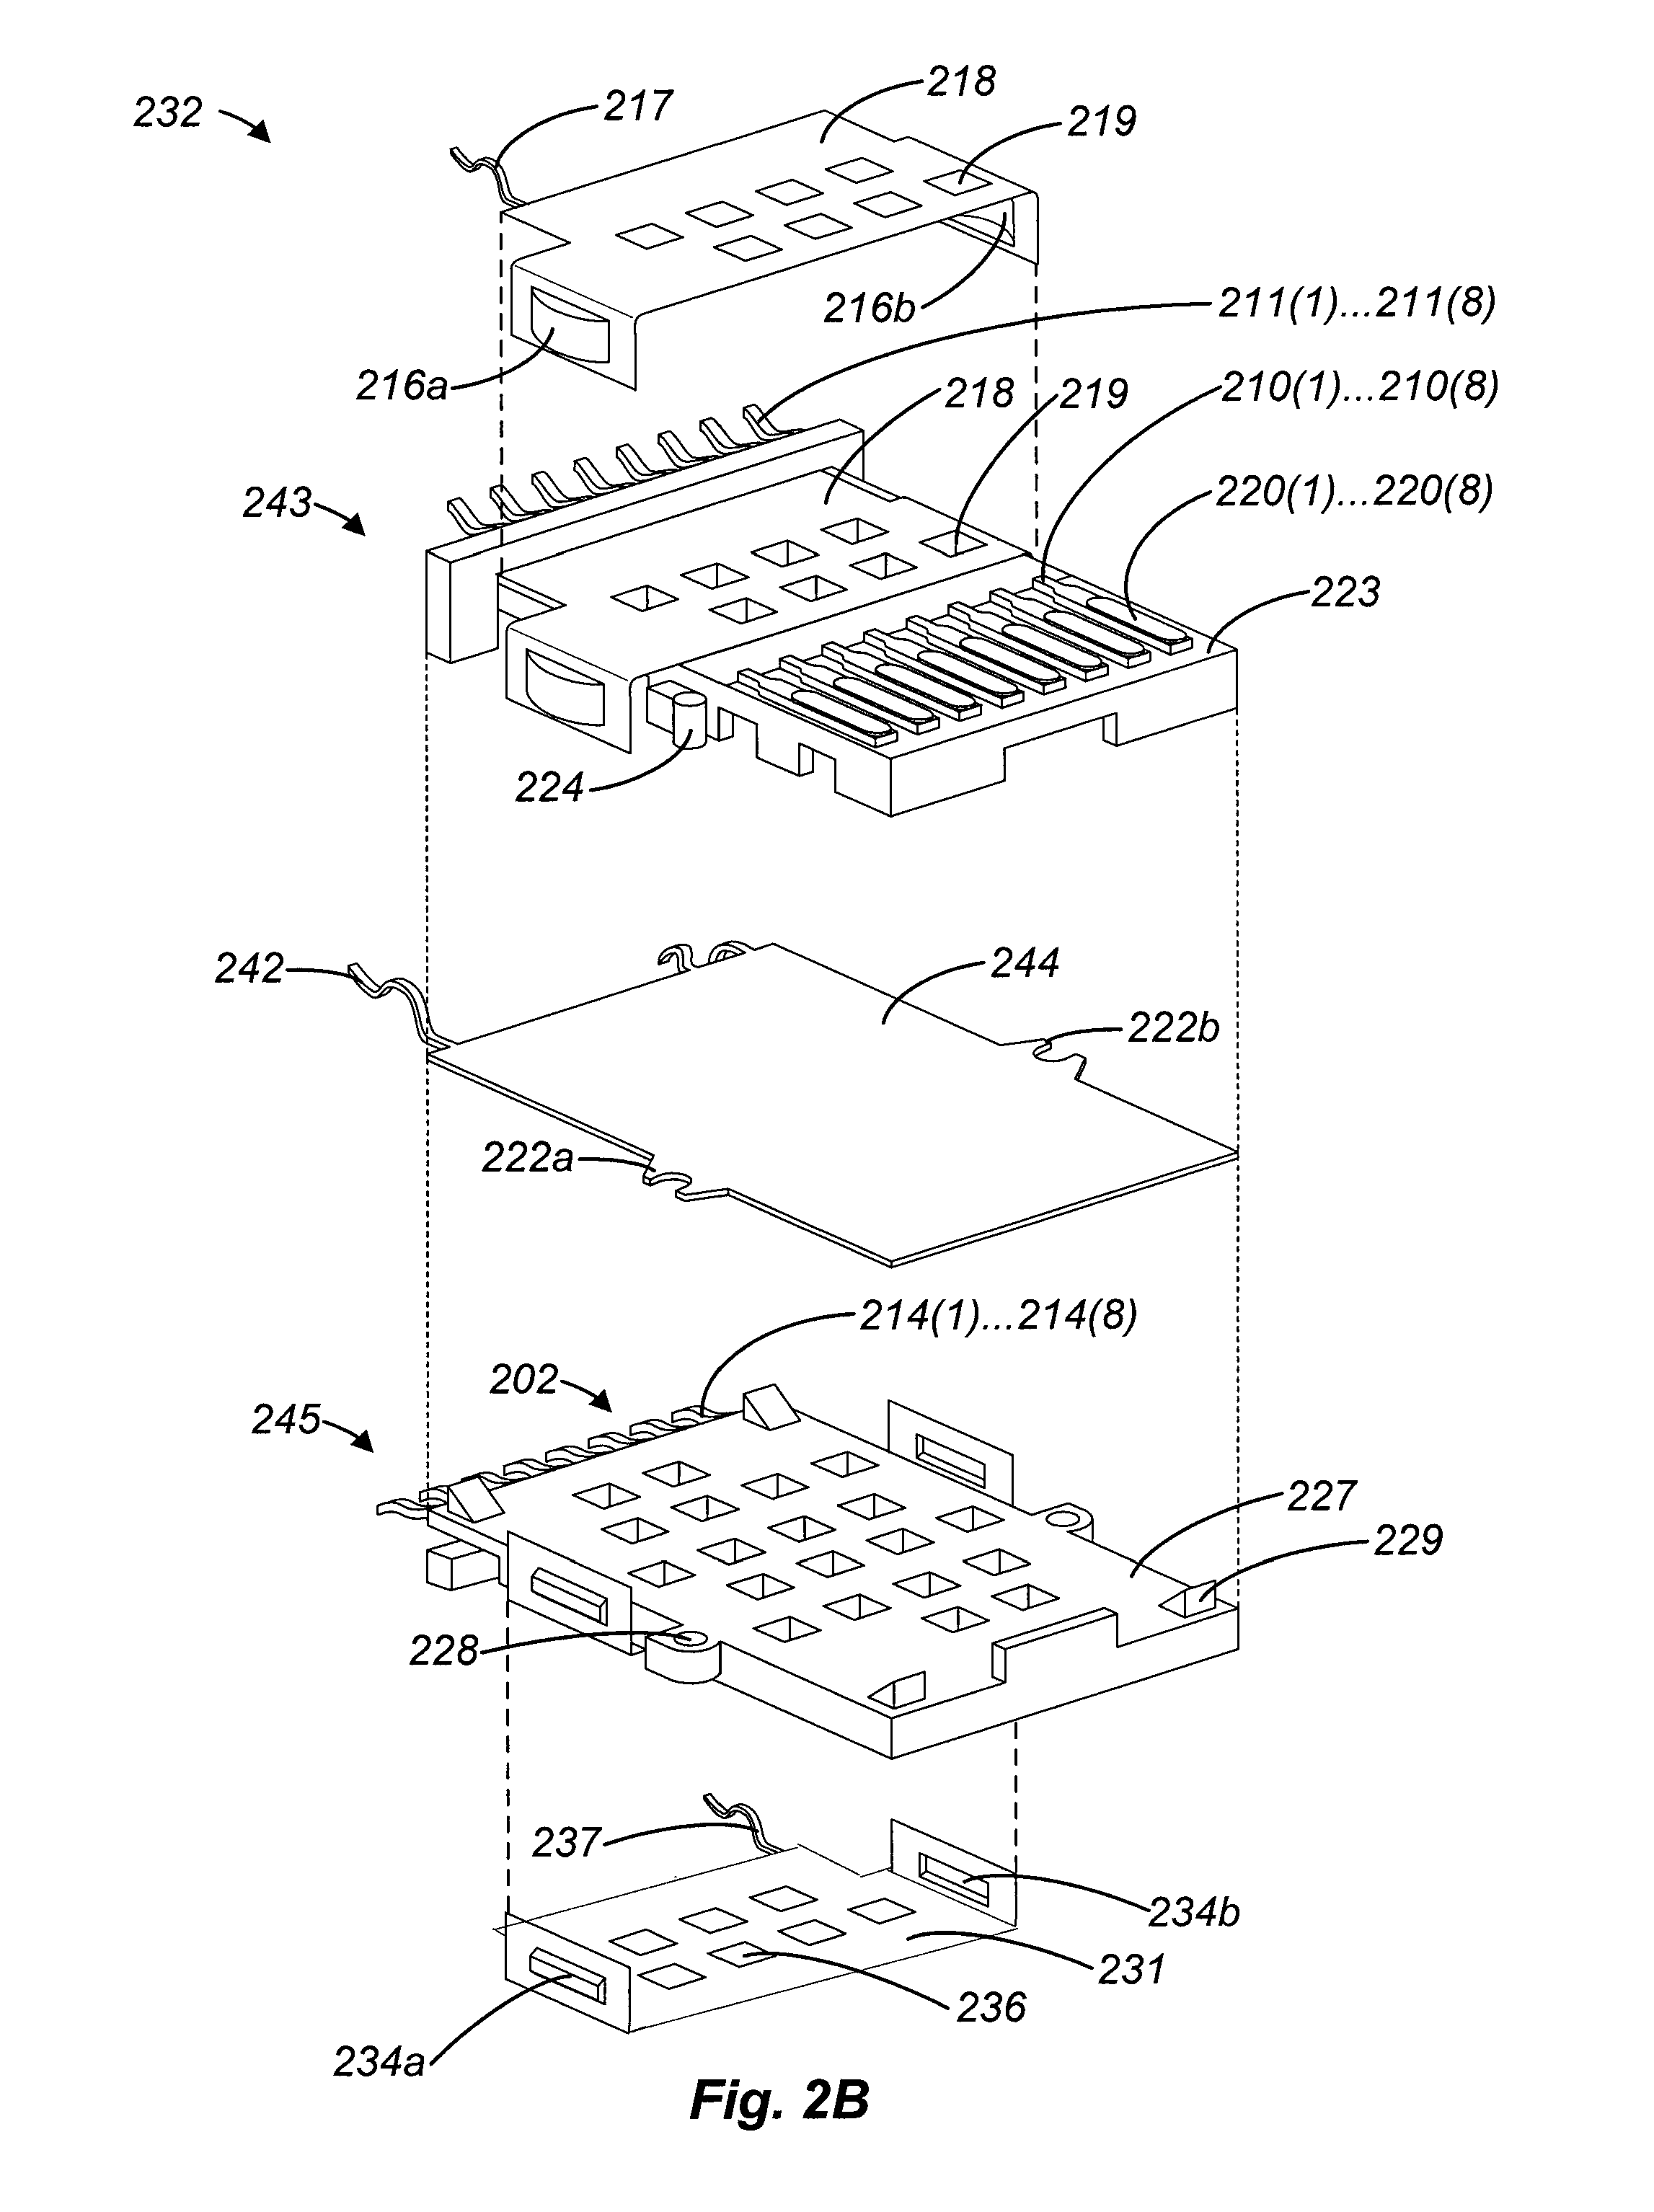 Plug connector having an over-molded contact assembly with a conductive plate between two sets of electrical contacts